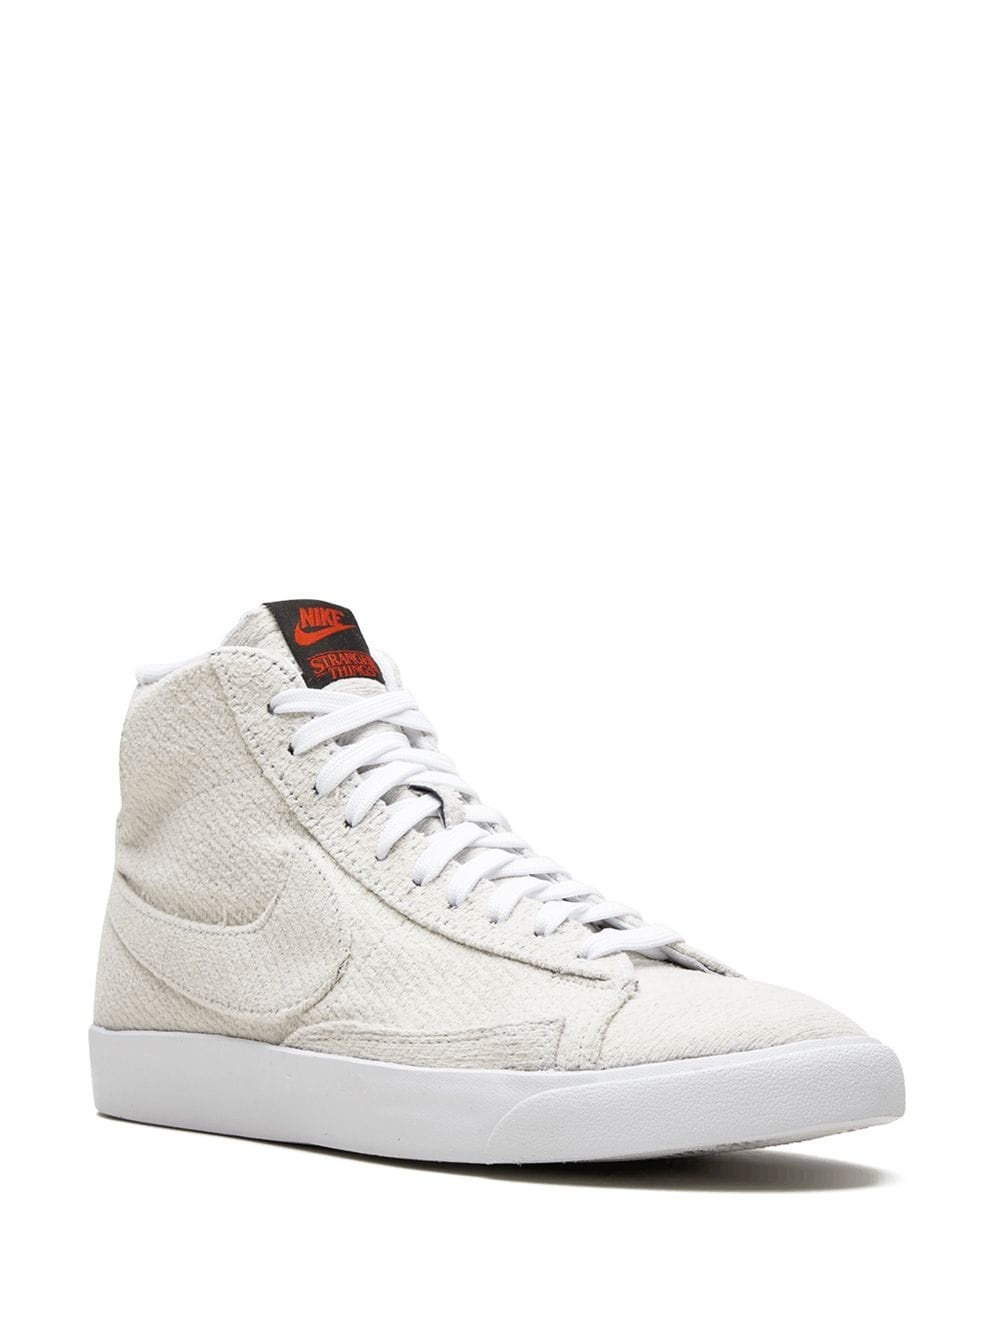 x The Stranger Things Blazer Mid QS UD sneakers - 2